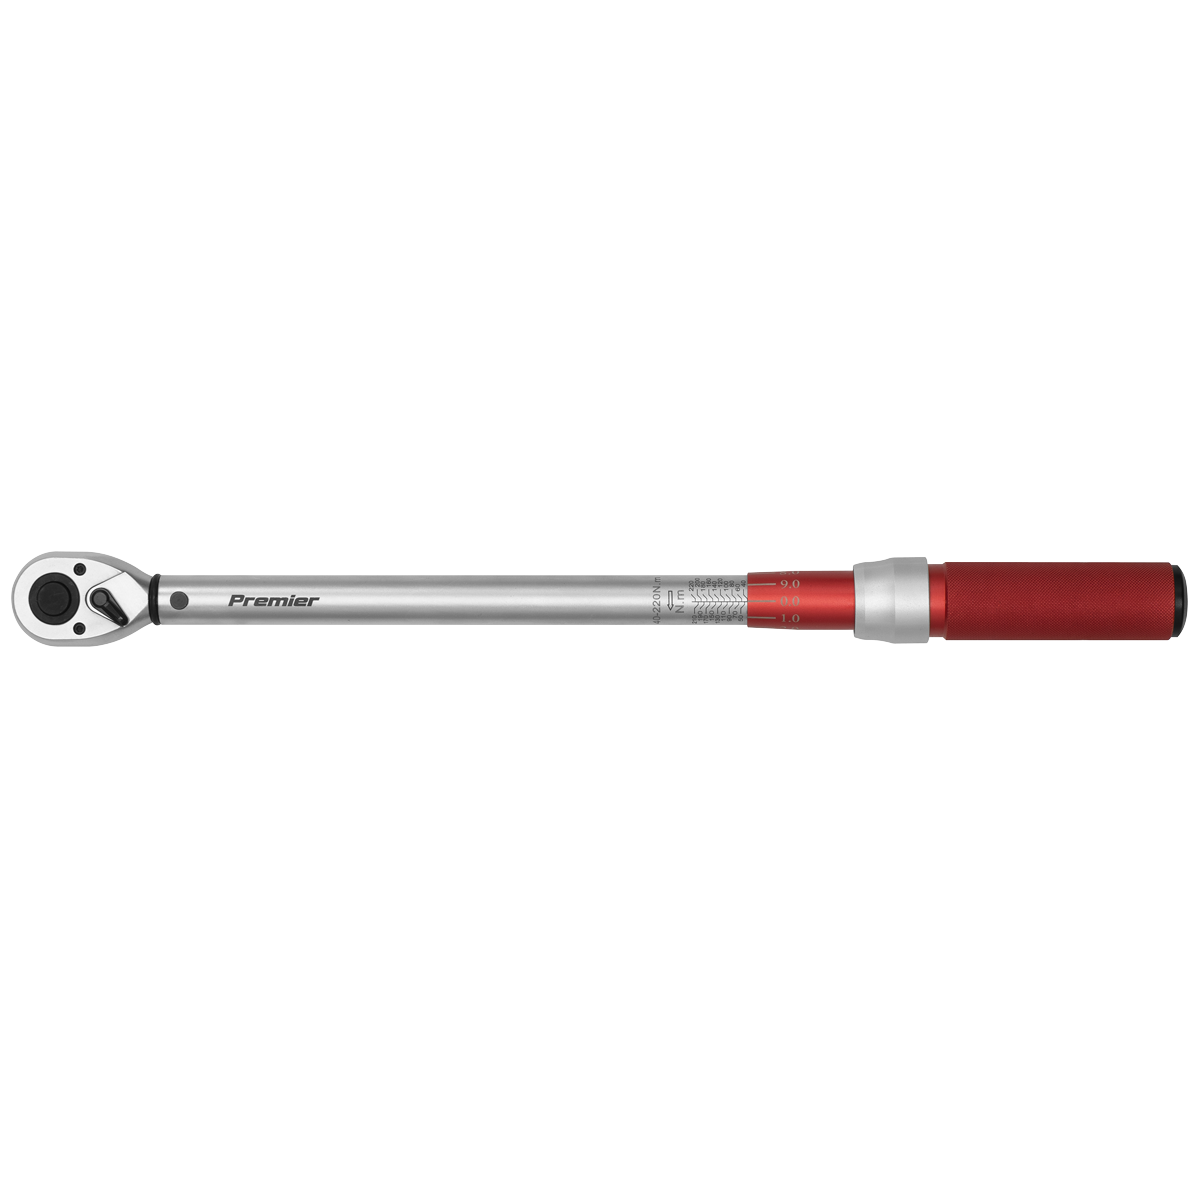 Torque Wrench Micrometer Style 1/2"Sq Drive 40-220Nm - Calibrated